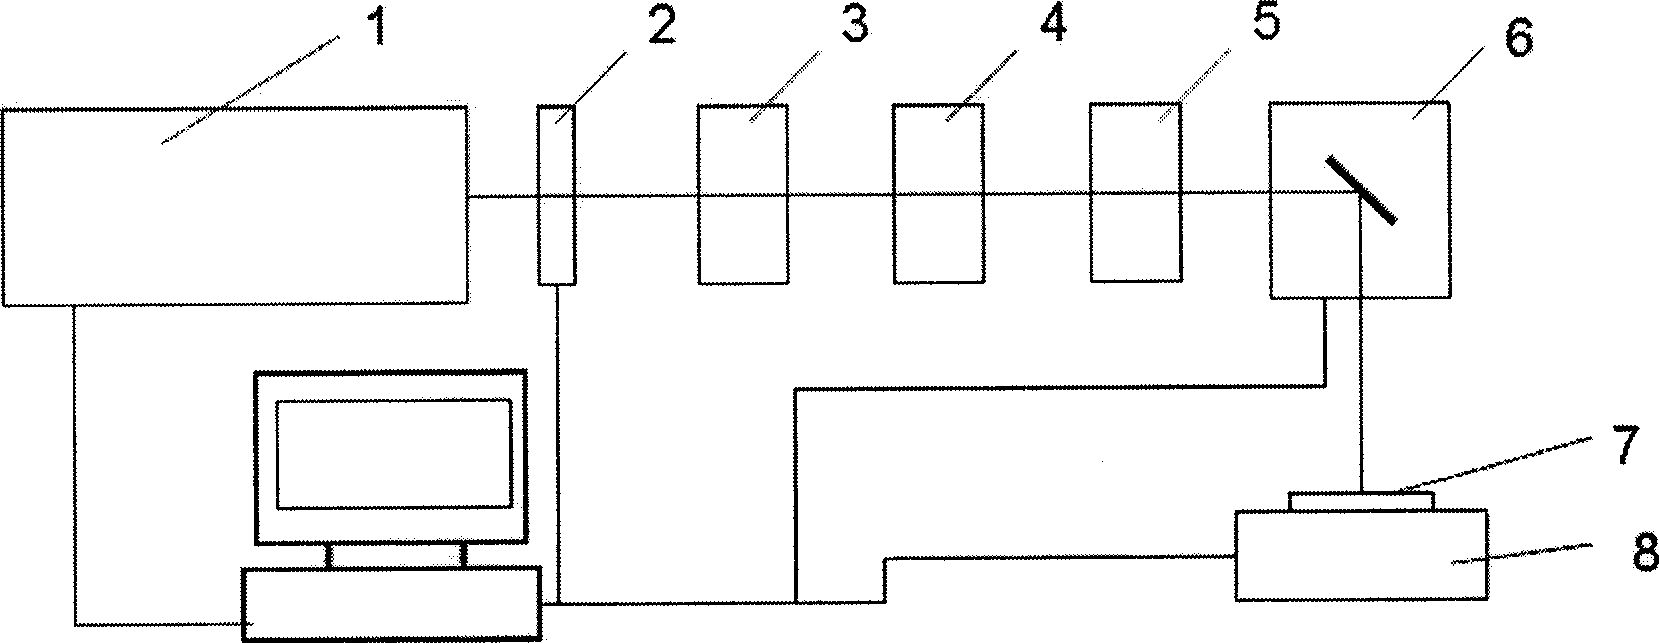 Method for altering metal surface color with ultra-short pulse laser